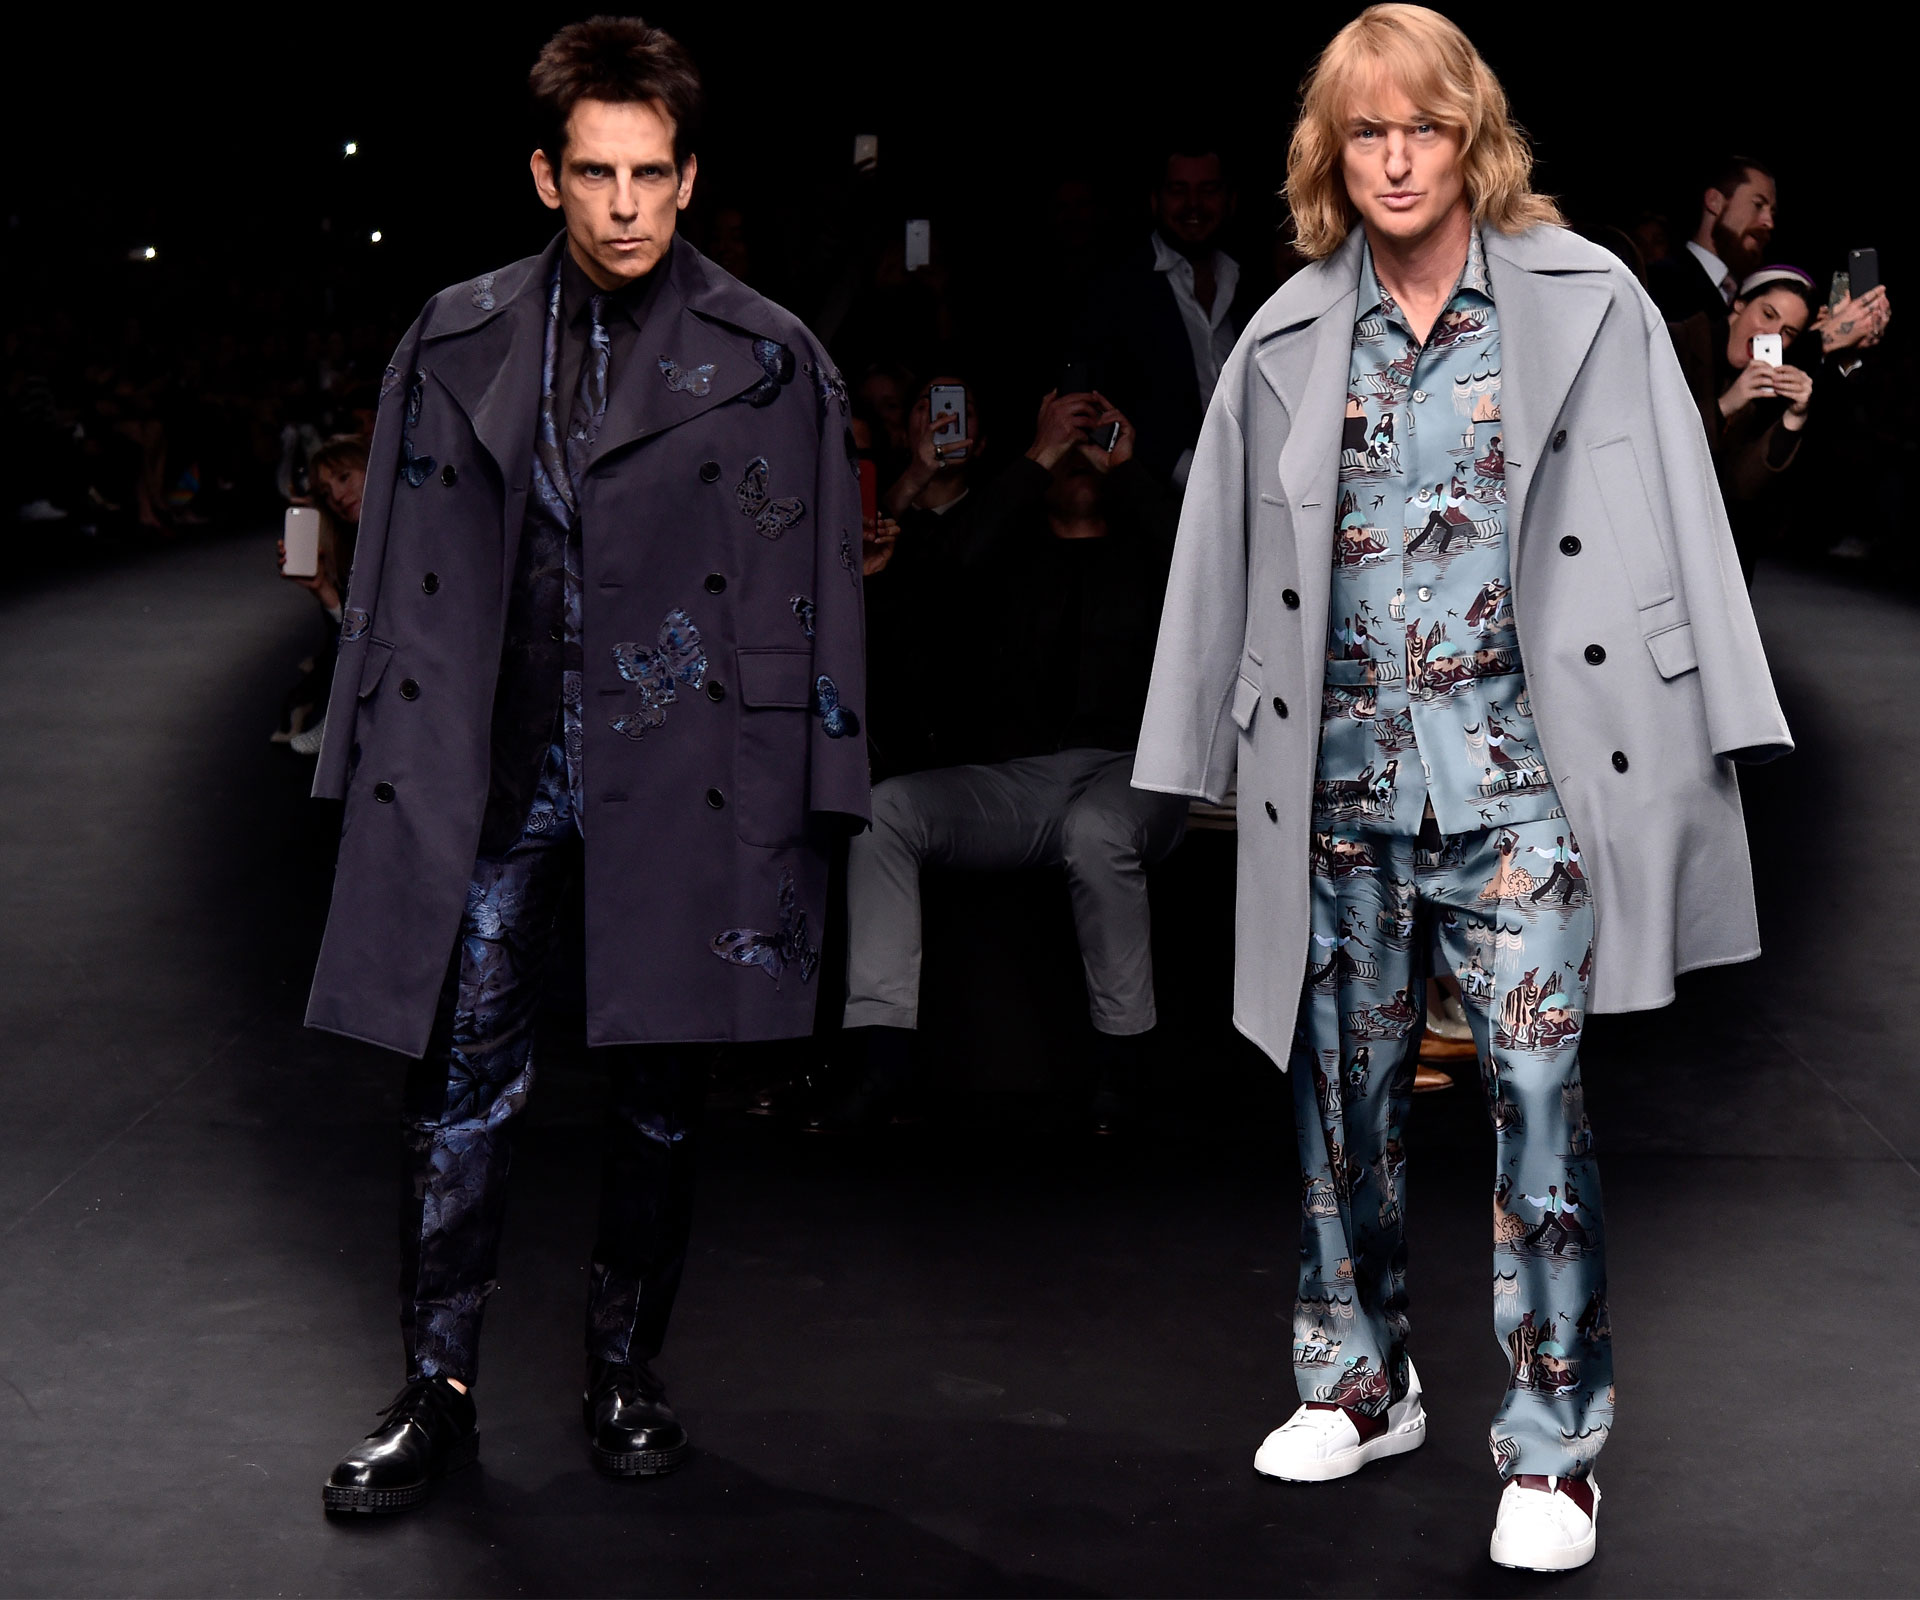 Watch the trailer for Zoolander 2